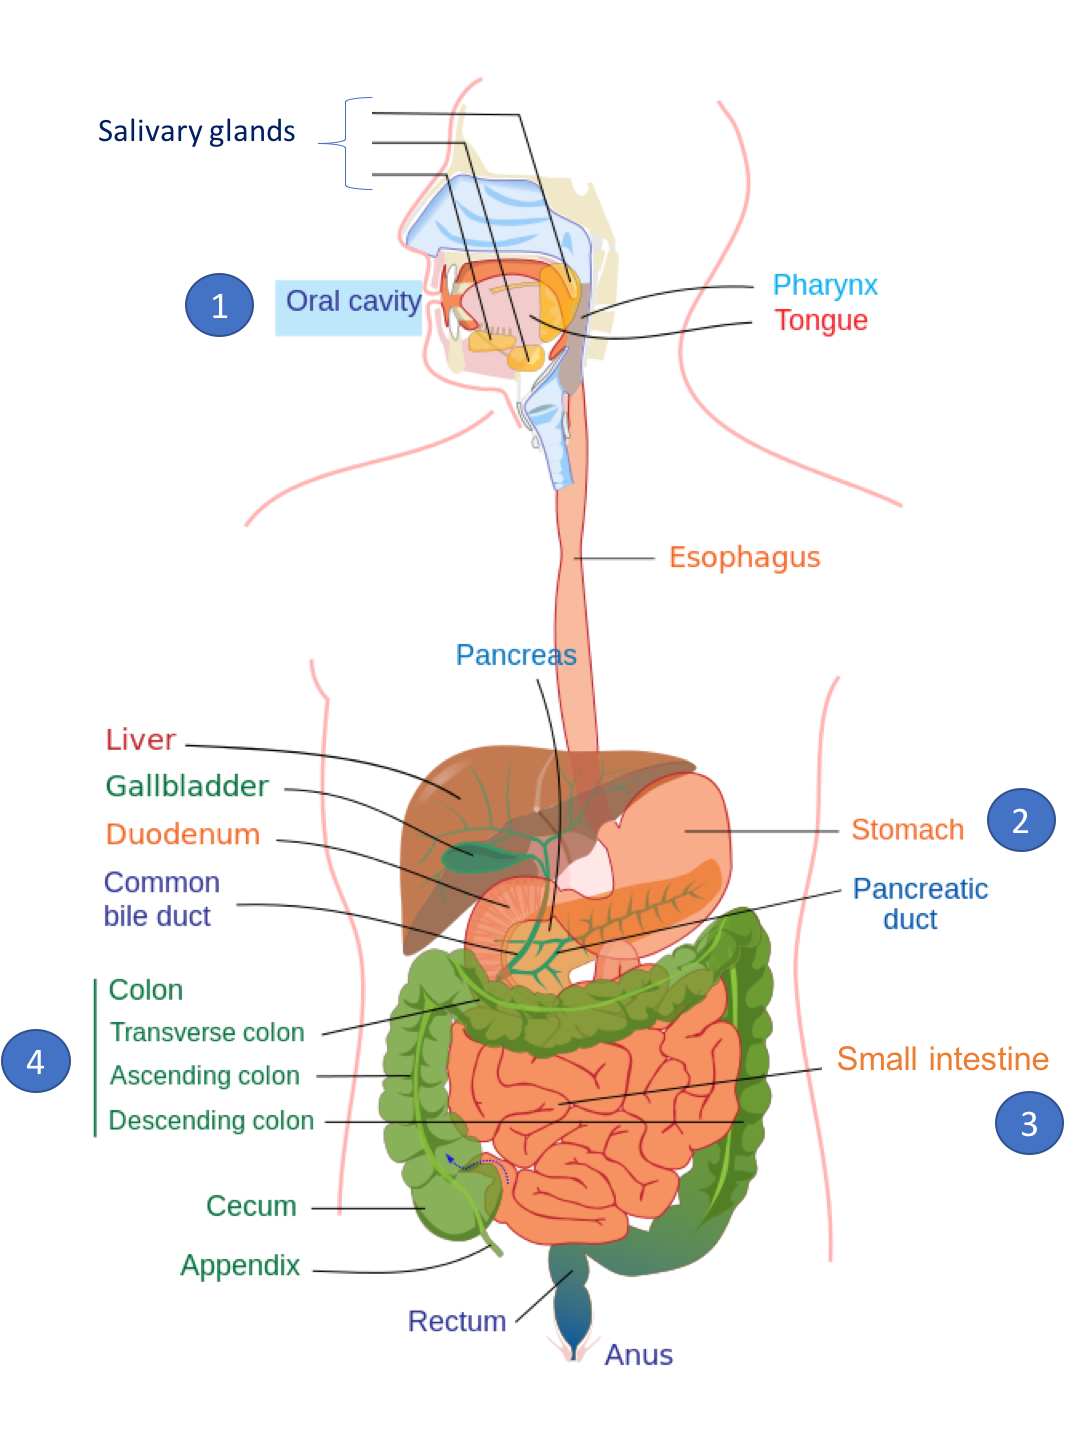 Illustration of the digestive system, with major sites of digestion numbered: oral cavity (1); stomach (2); small intestine (3); and large intestine or colon (4).